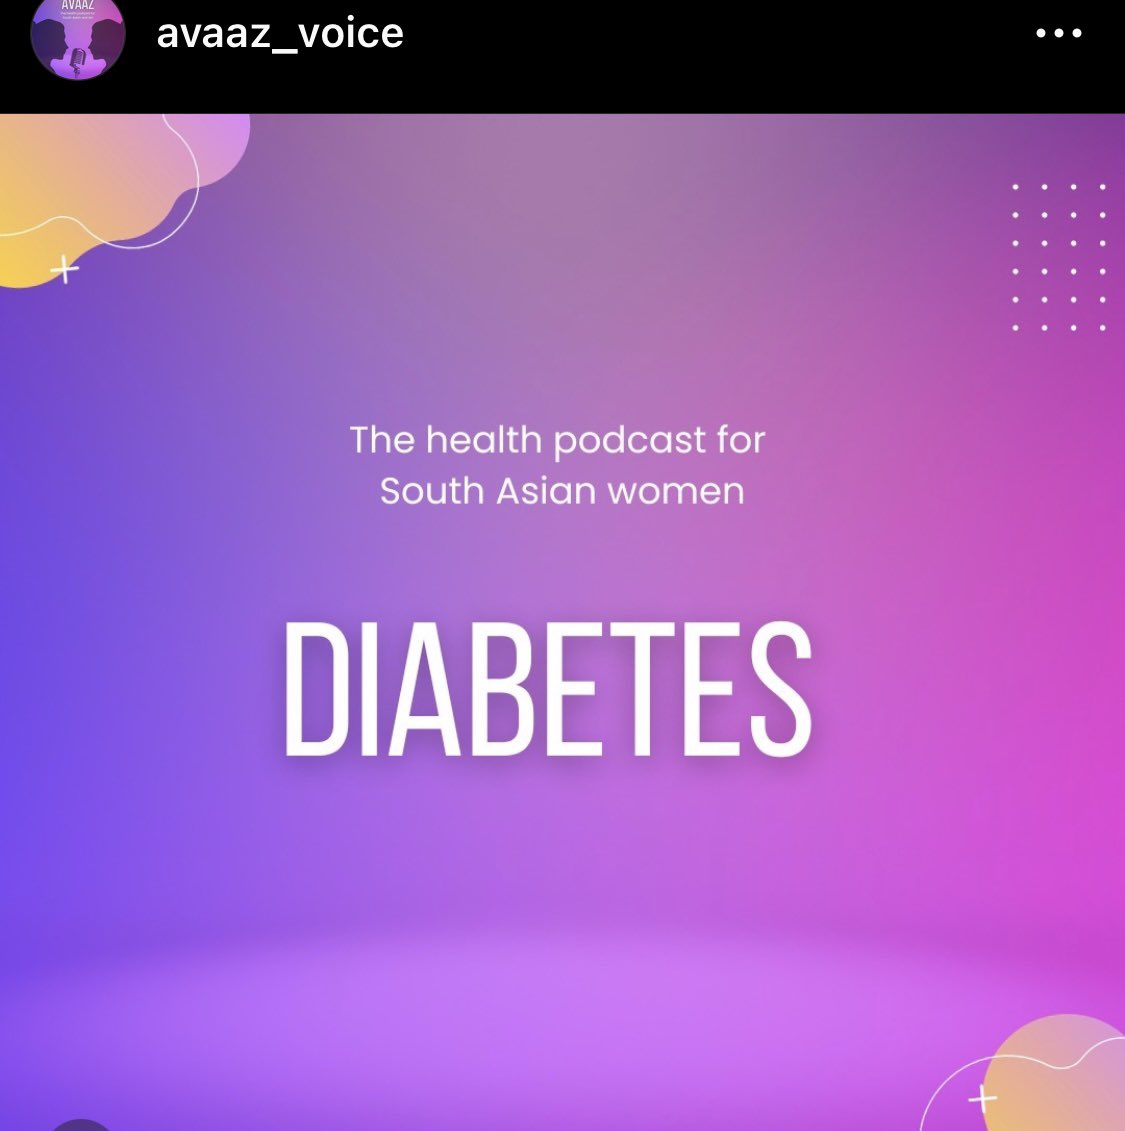 Our latest podcast on diabetes and the increased risk for South Asians. We talk about the risk factors, signs and complications of having diabetes, and how to prevent it. Learn how to calculate your risk: Canrisk calculator ⁠healthycanadians.gc.ca/en/canrisk⁠ #diabetes #avaazpodcast